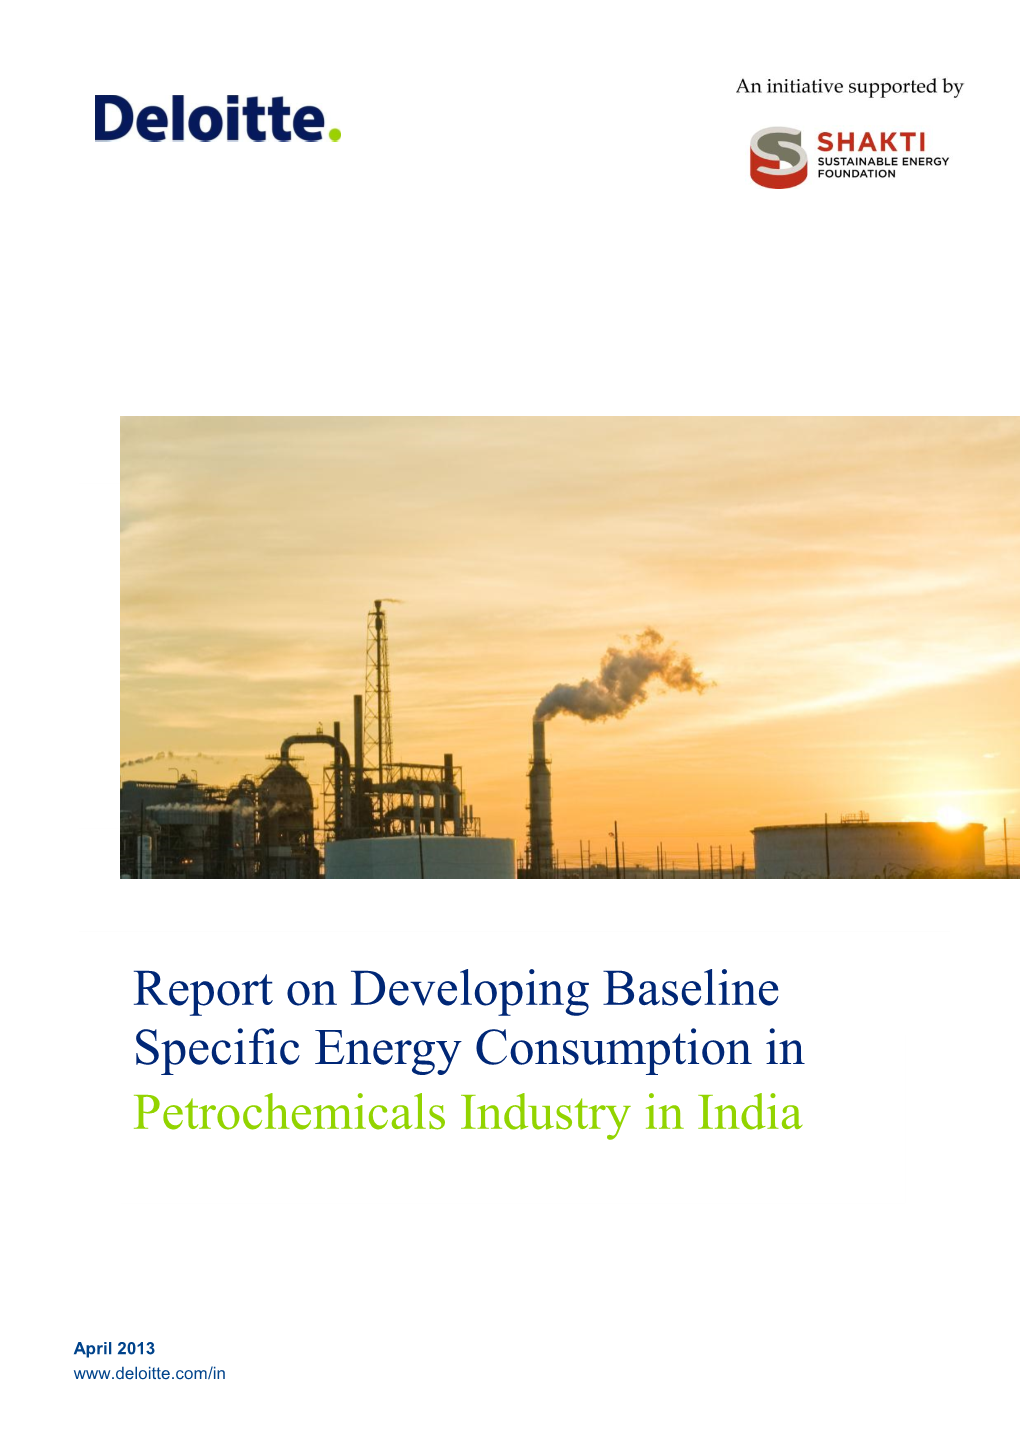 Report on Developing Baseline Specific Energy Consumption in Petrochemicals Industry in India